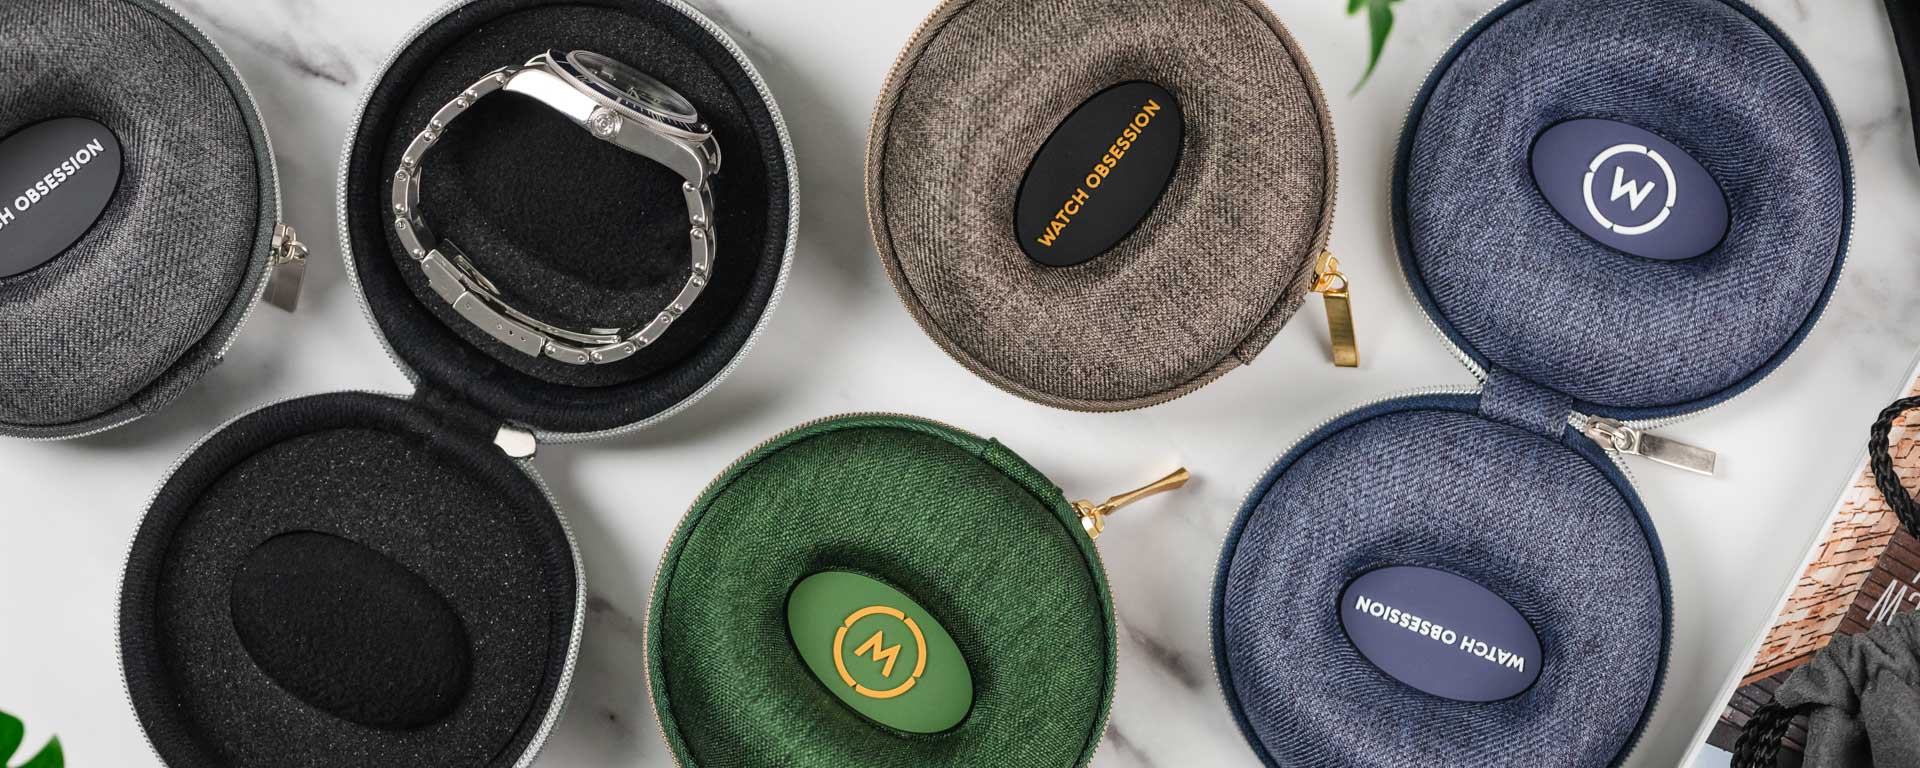 5 twill fabric travel single watch cases made of a durable twill fabric and in a variety of colours including grey, green, blue and brown.